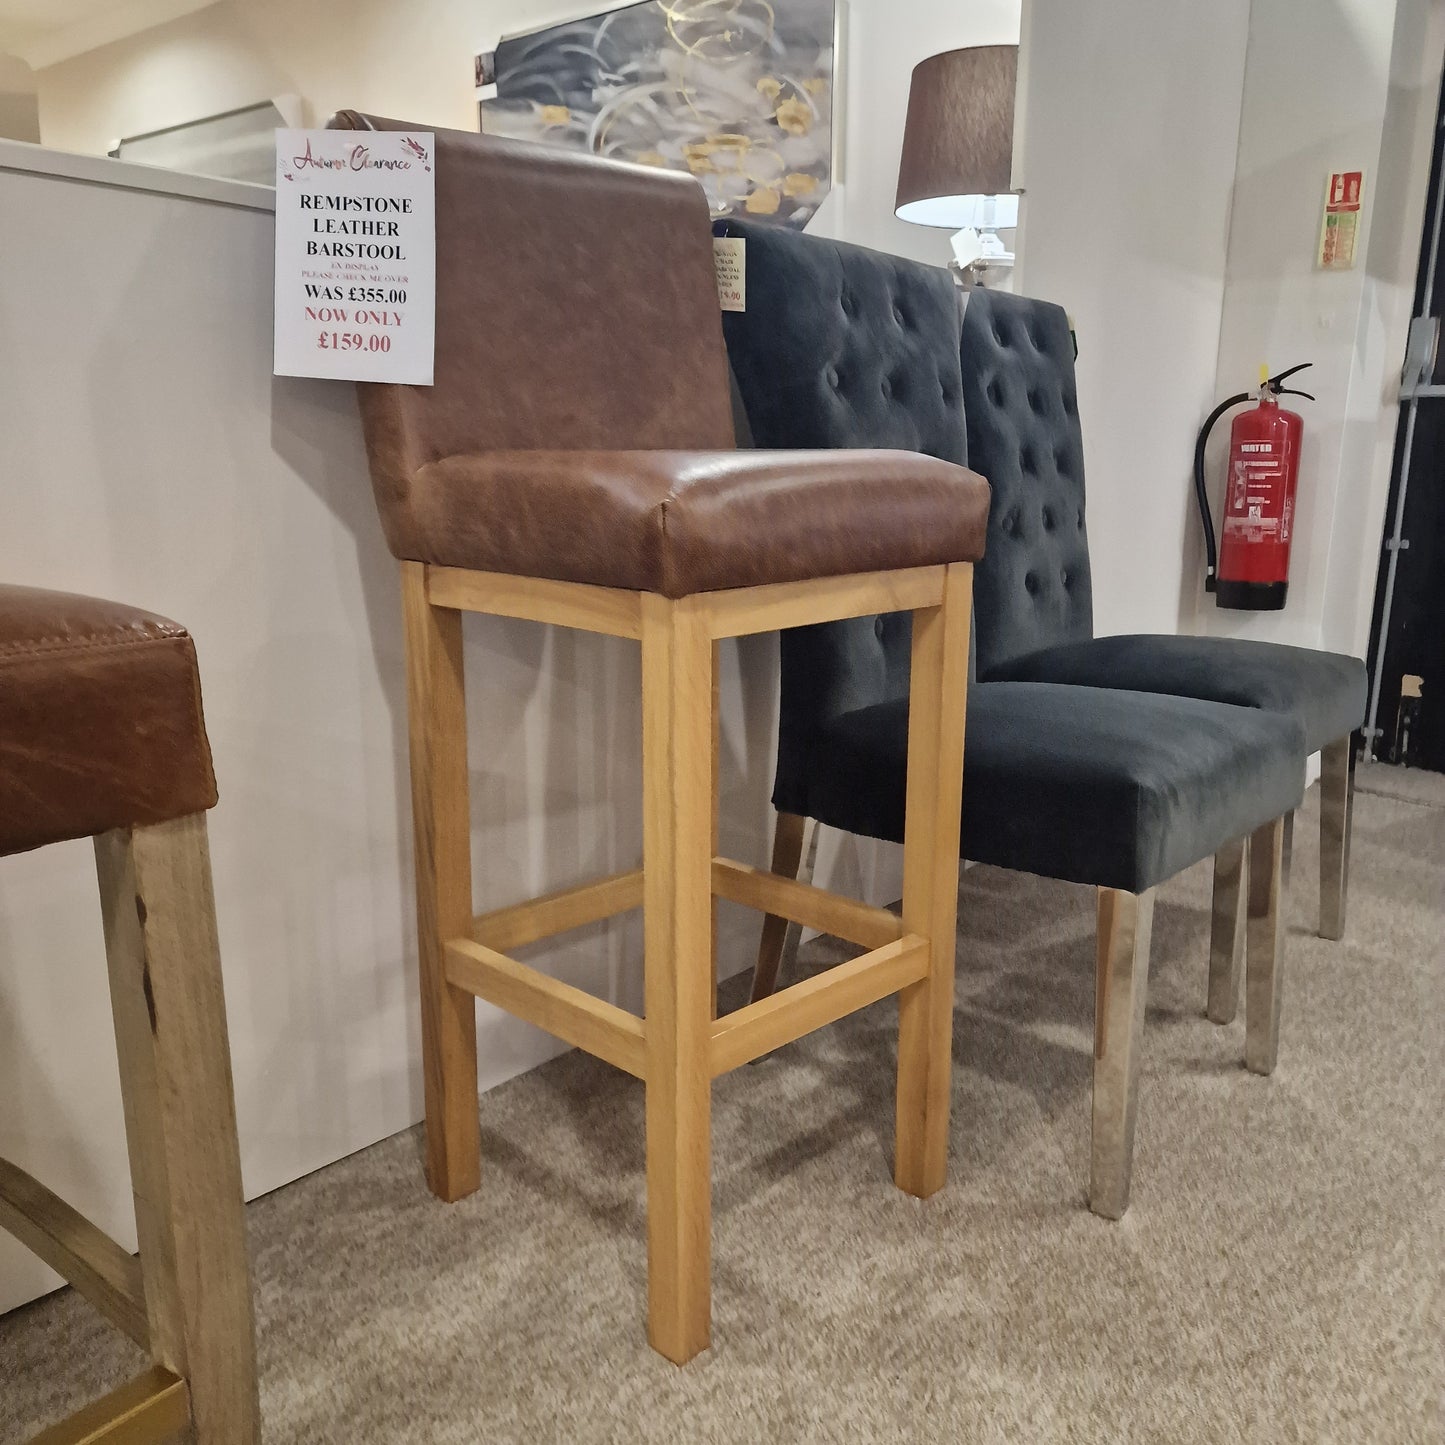 Rempstone Leather Barstool | Clearance